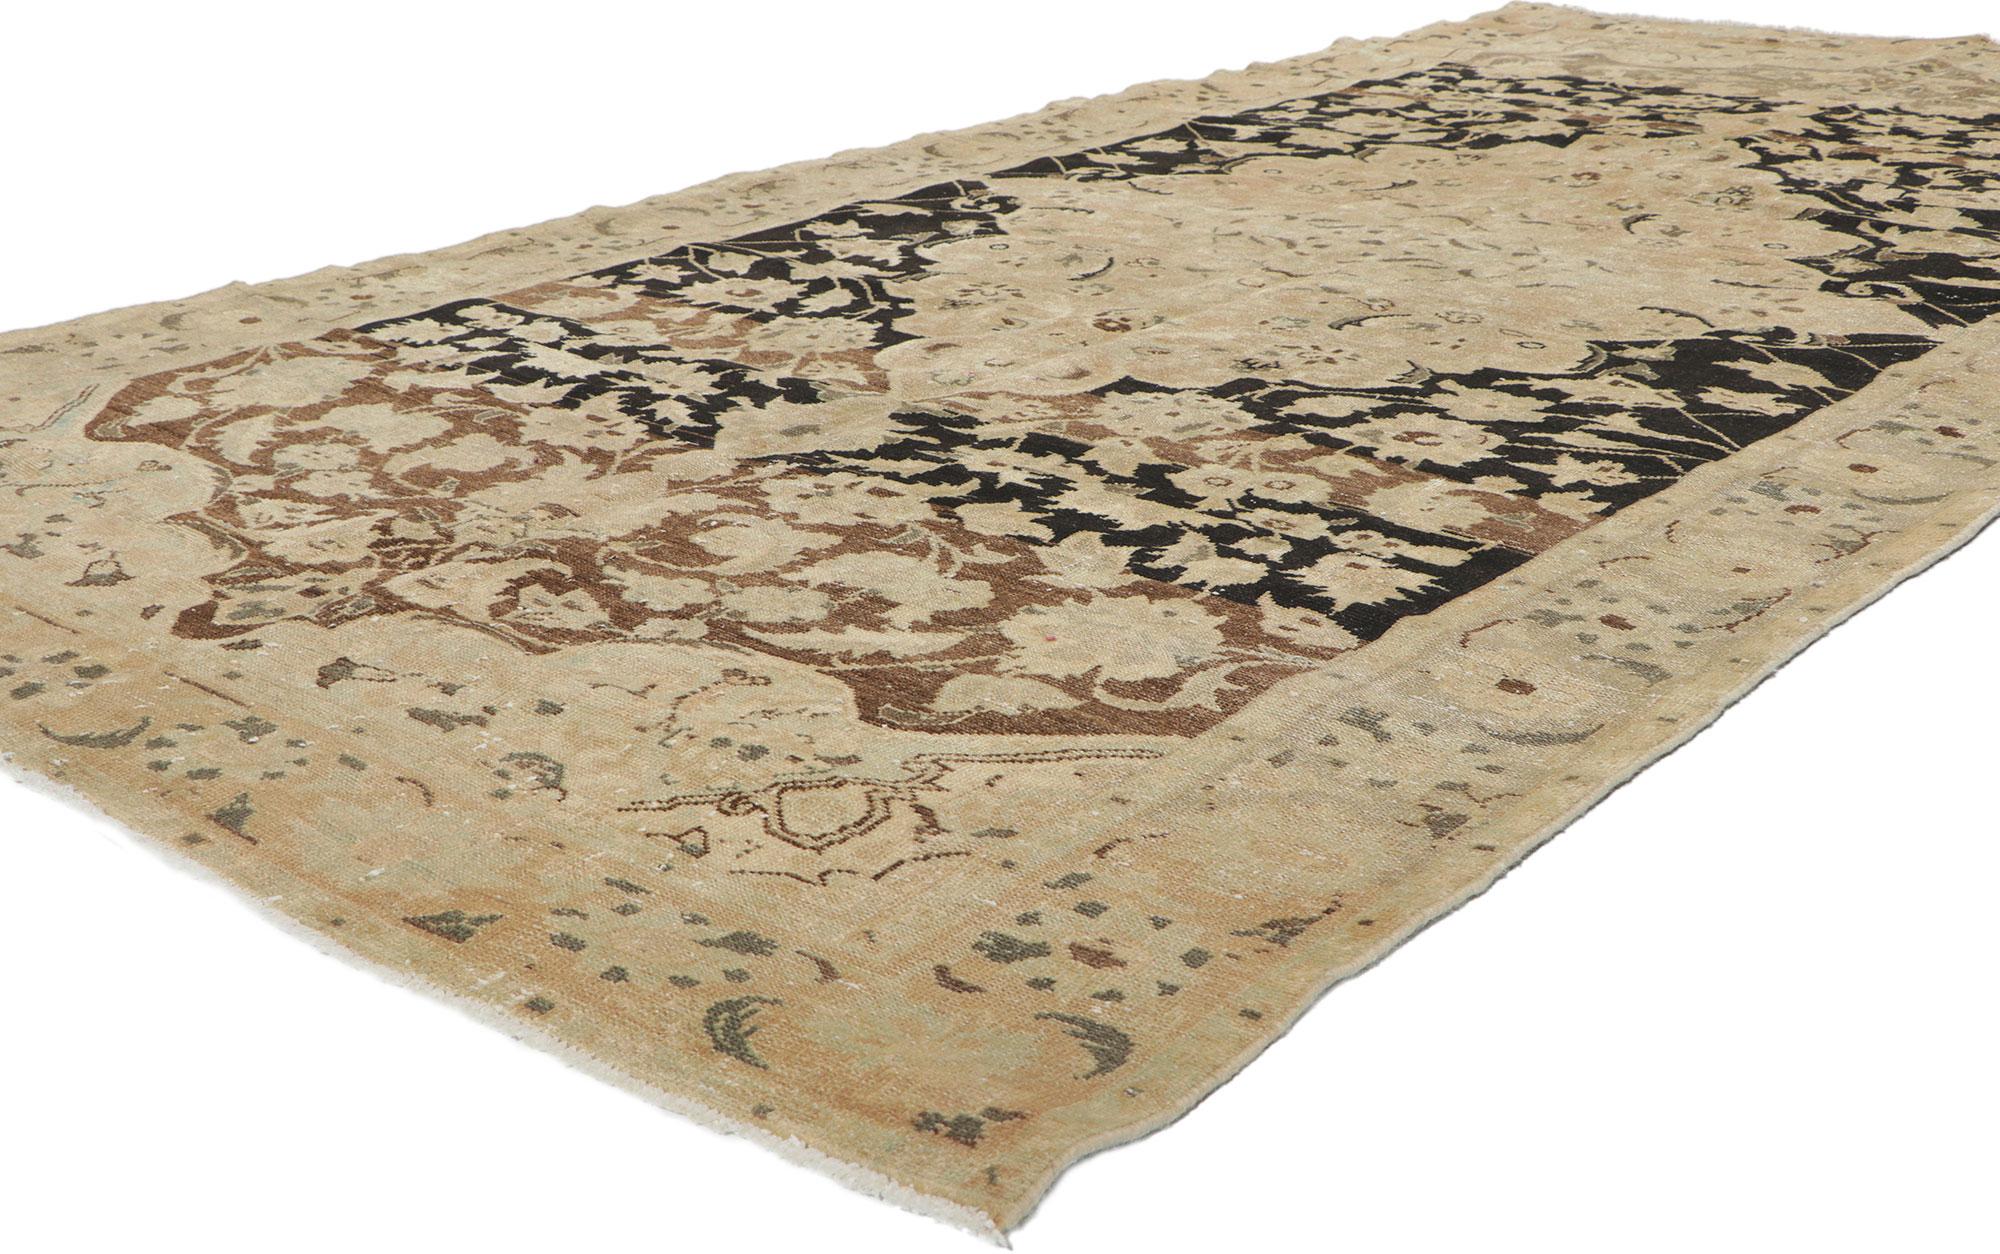 60959 Distressed Antique Persian Feridan rug, 05'03 x 09'11
Distressed. Desirable Age Wear. 
Antique Wash.
Abrash.
Made in Iran.